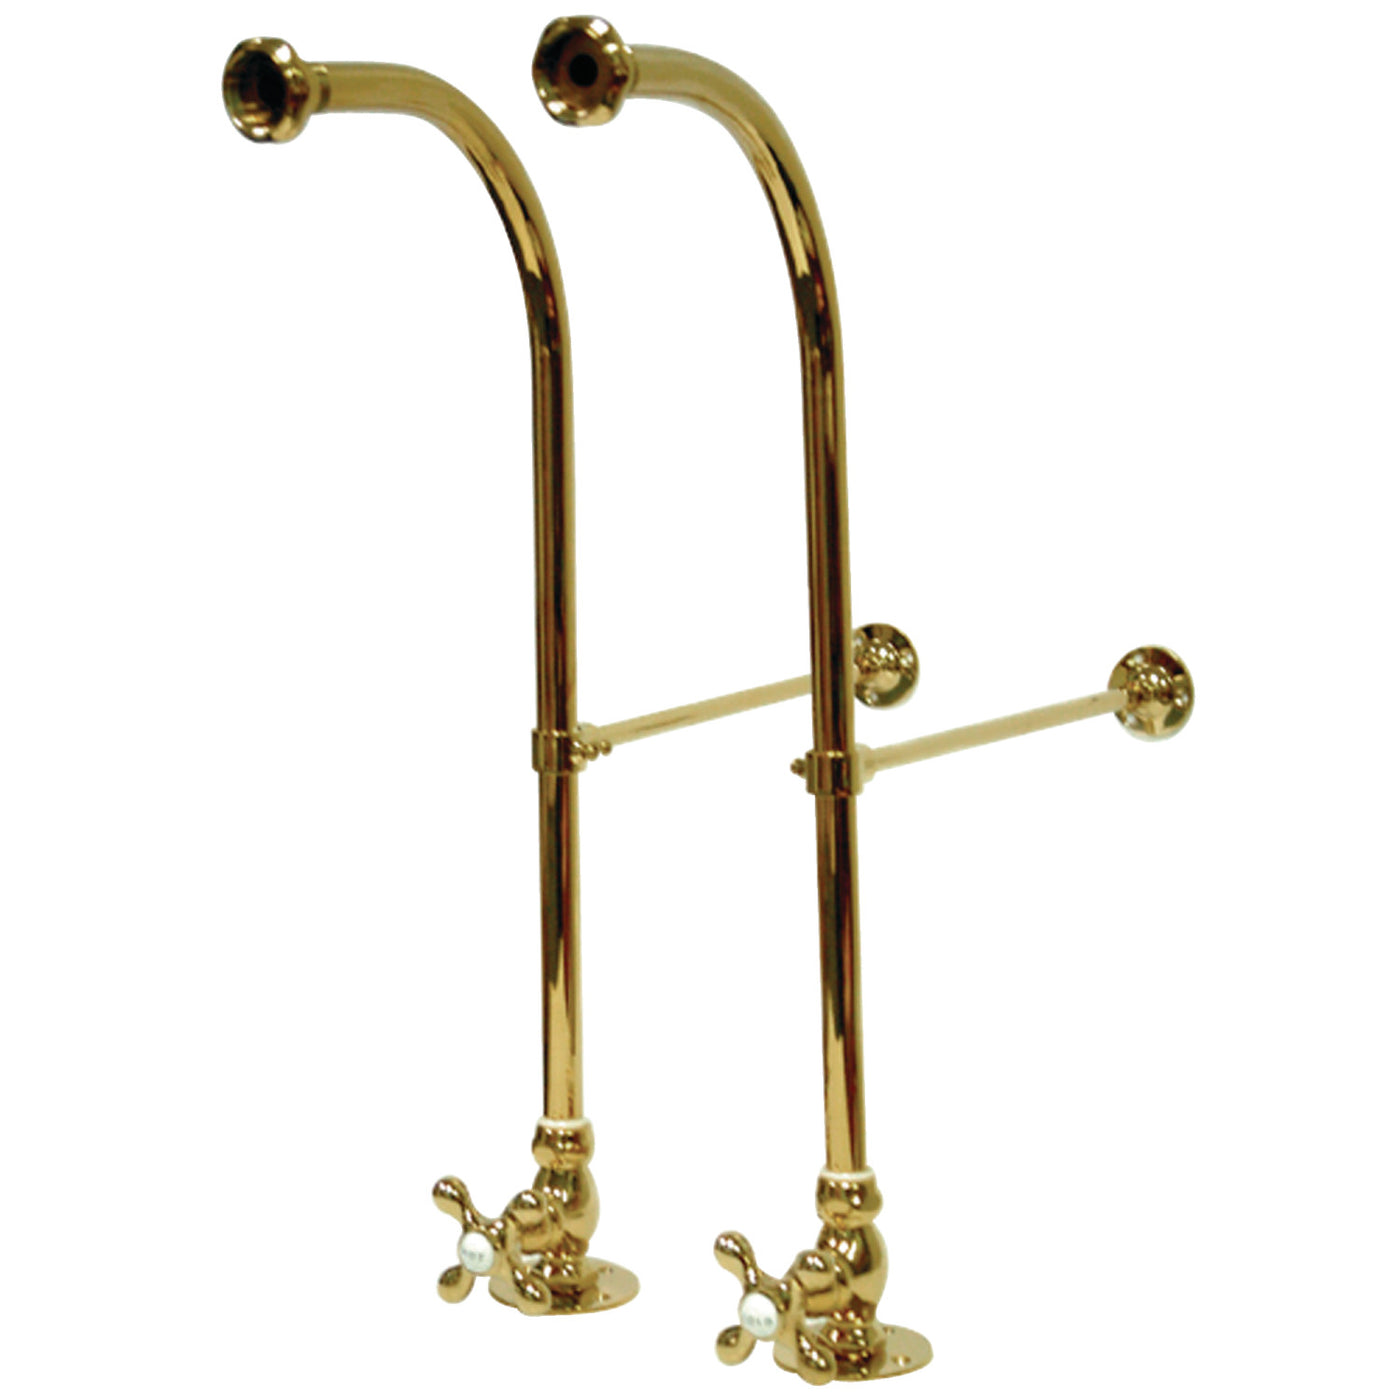 Elements of Design DS452MX Rigid Freestand Supplies with Stops, Polished Brass